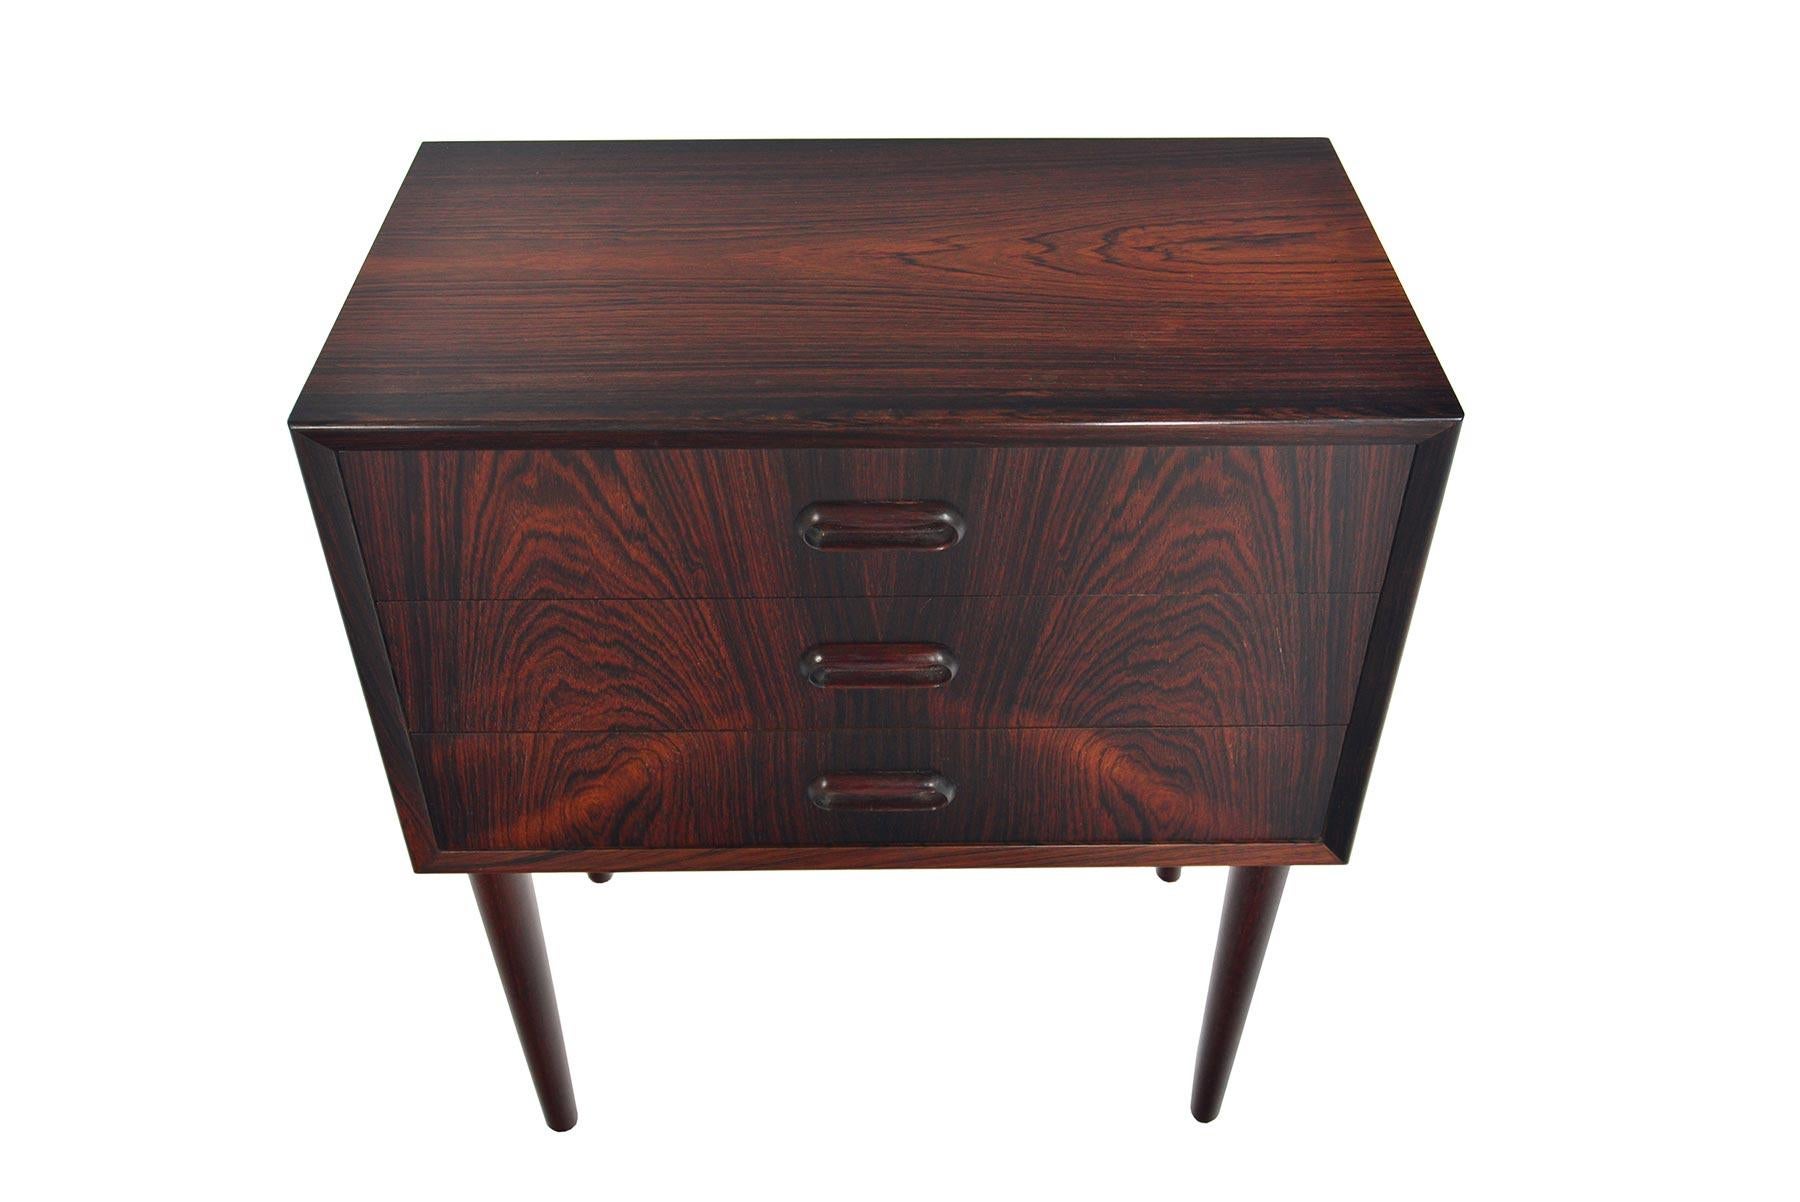 This Danish modern midcentury three-drawer chest in Brazilian rosewood features beautiful grain patterns throughout. Perfect for use in an entry way or as a single nightstand, this piece offers exceptional storage! In excellent original condition